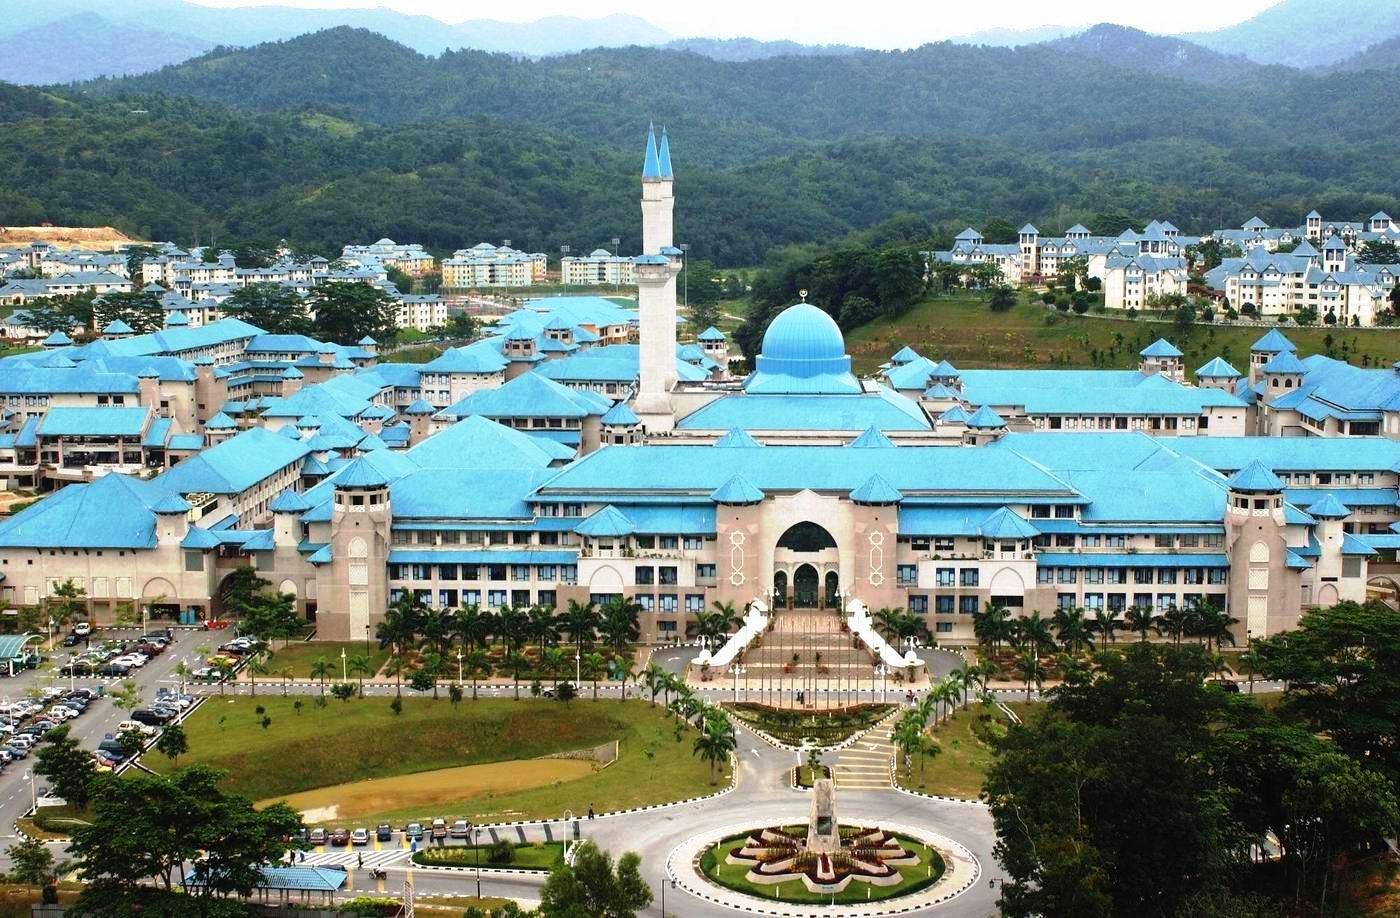 IIUM has been recently mired in controversy after allegedly withholding the passports of foreign students. Image credit: IslamiCity